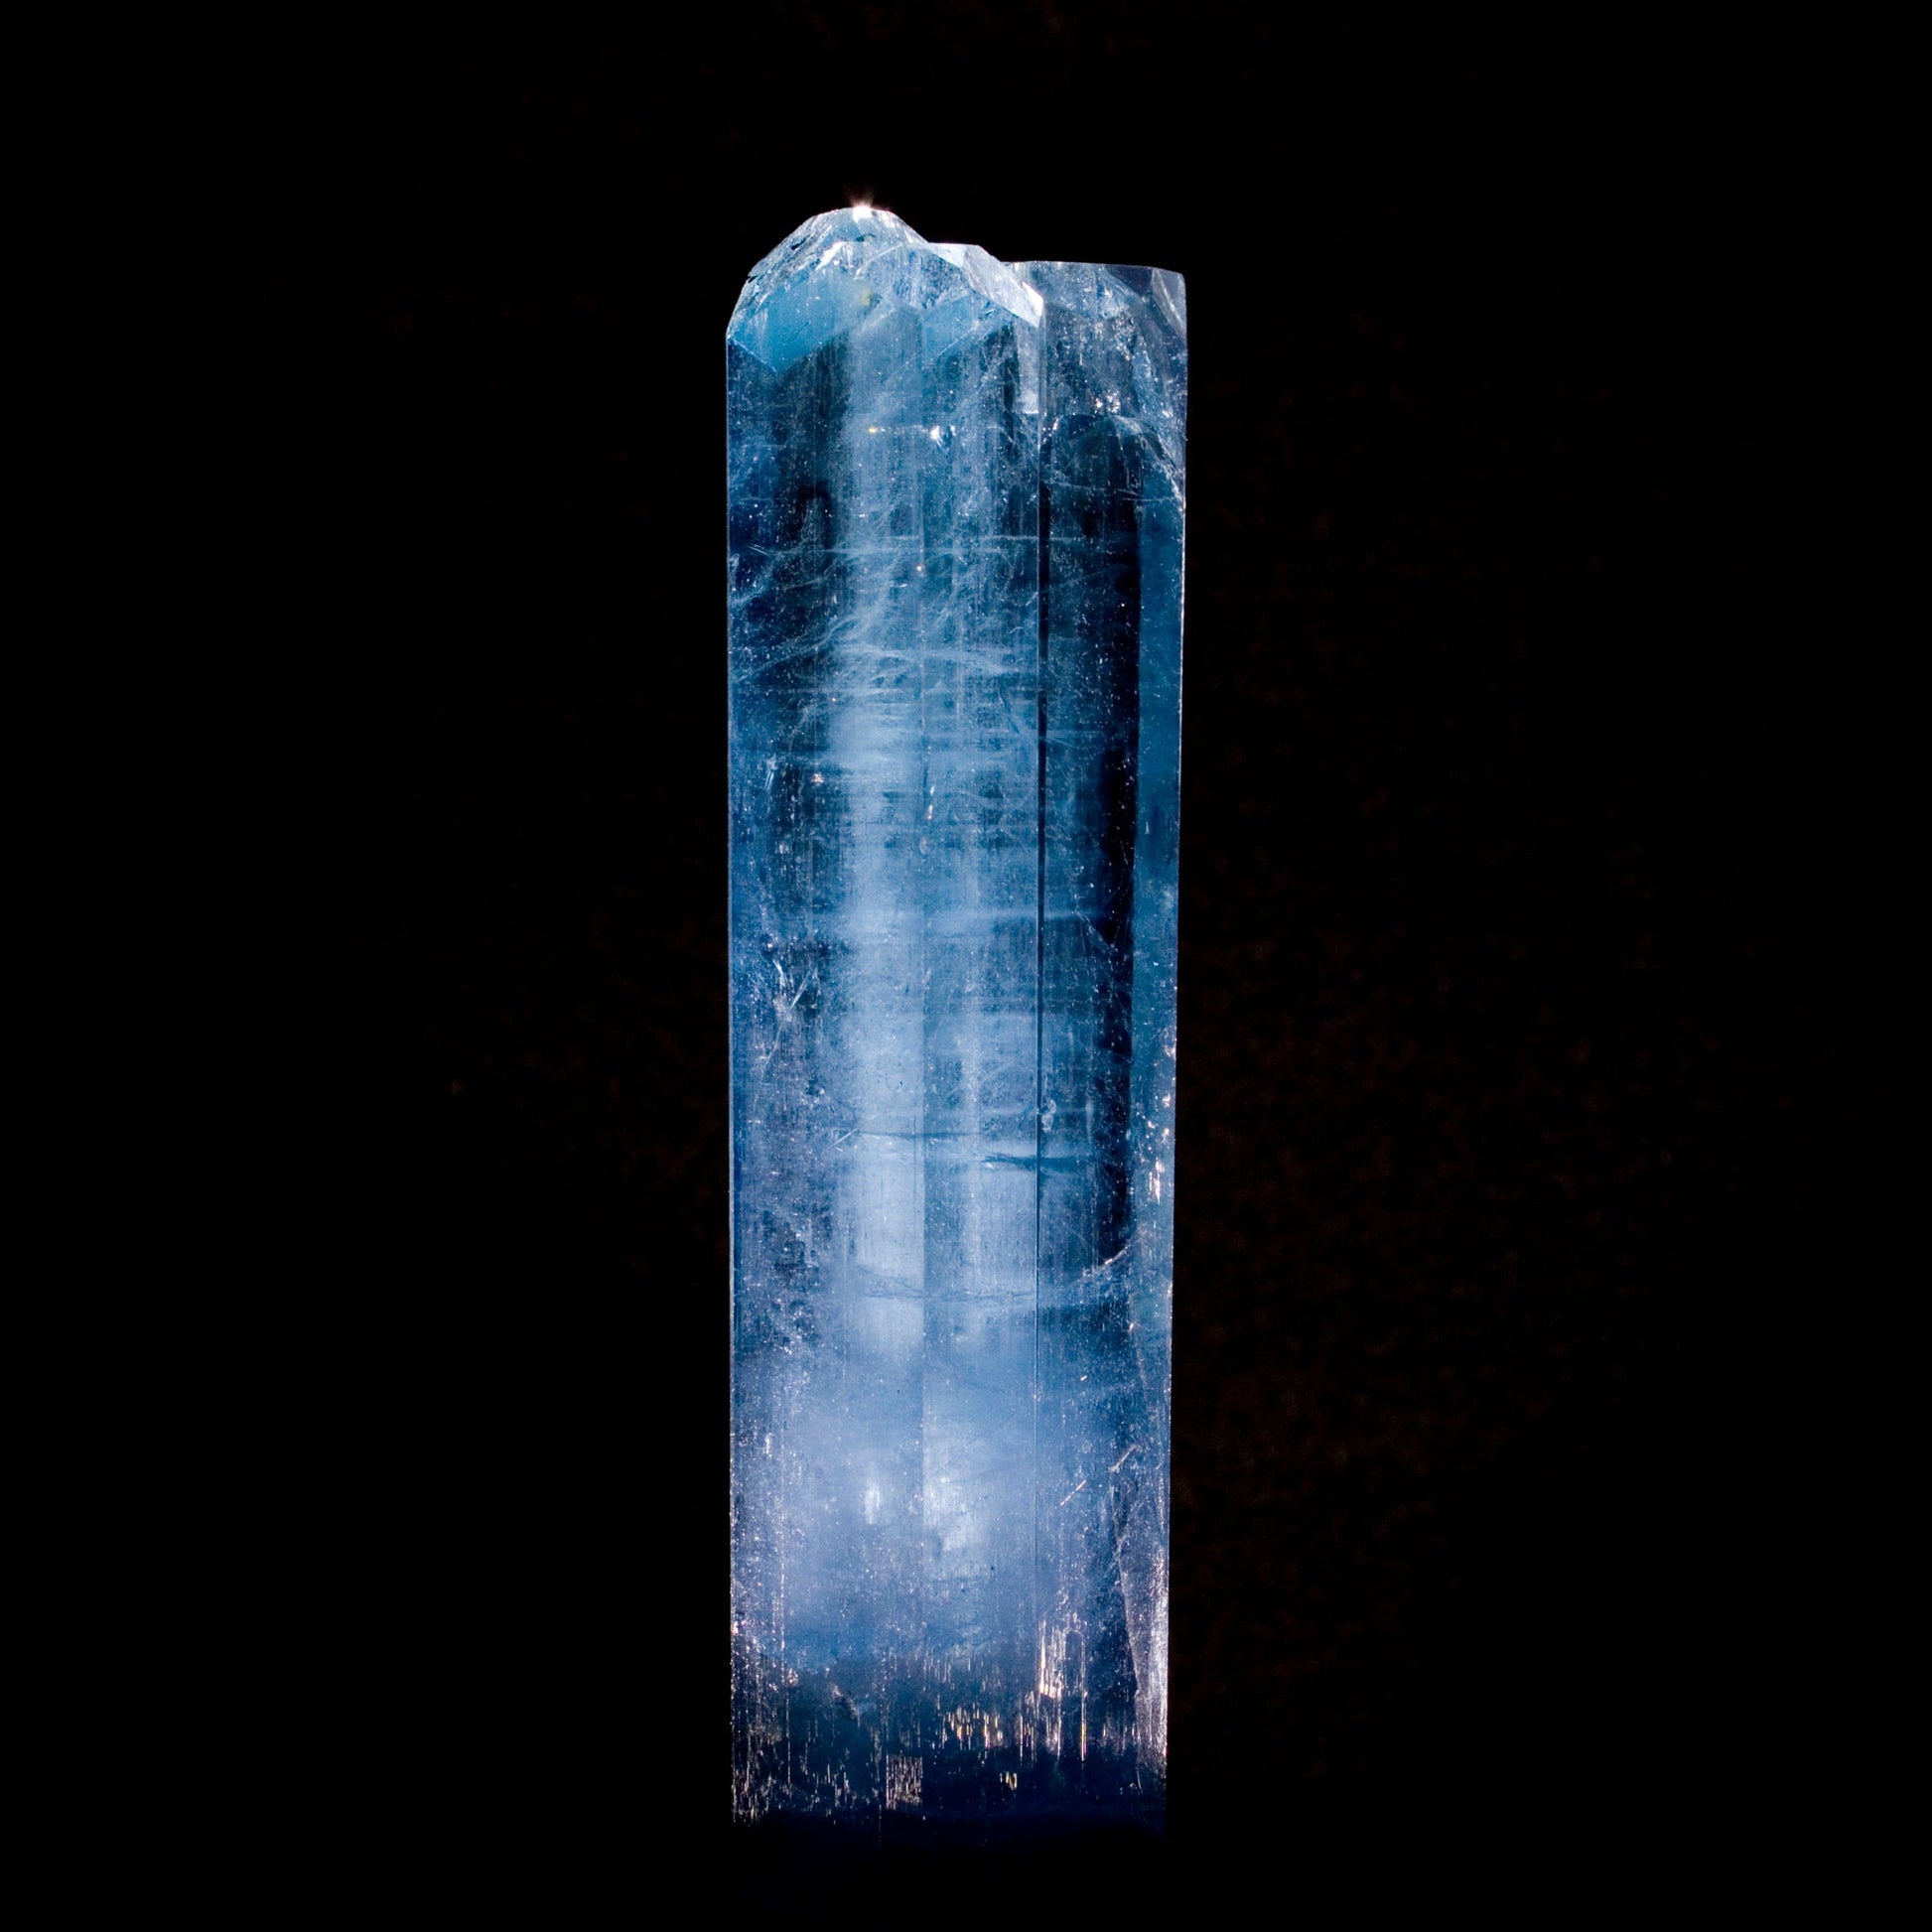 Aquamarine: Brilliant blue color with multiple terminations at the top sits in high contrast on black background. From Vietnam. All natural smooth, lustrous edges.